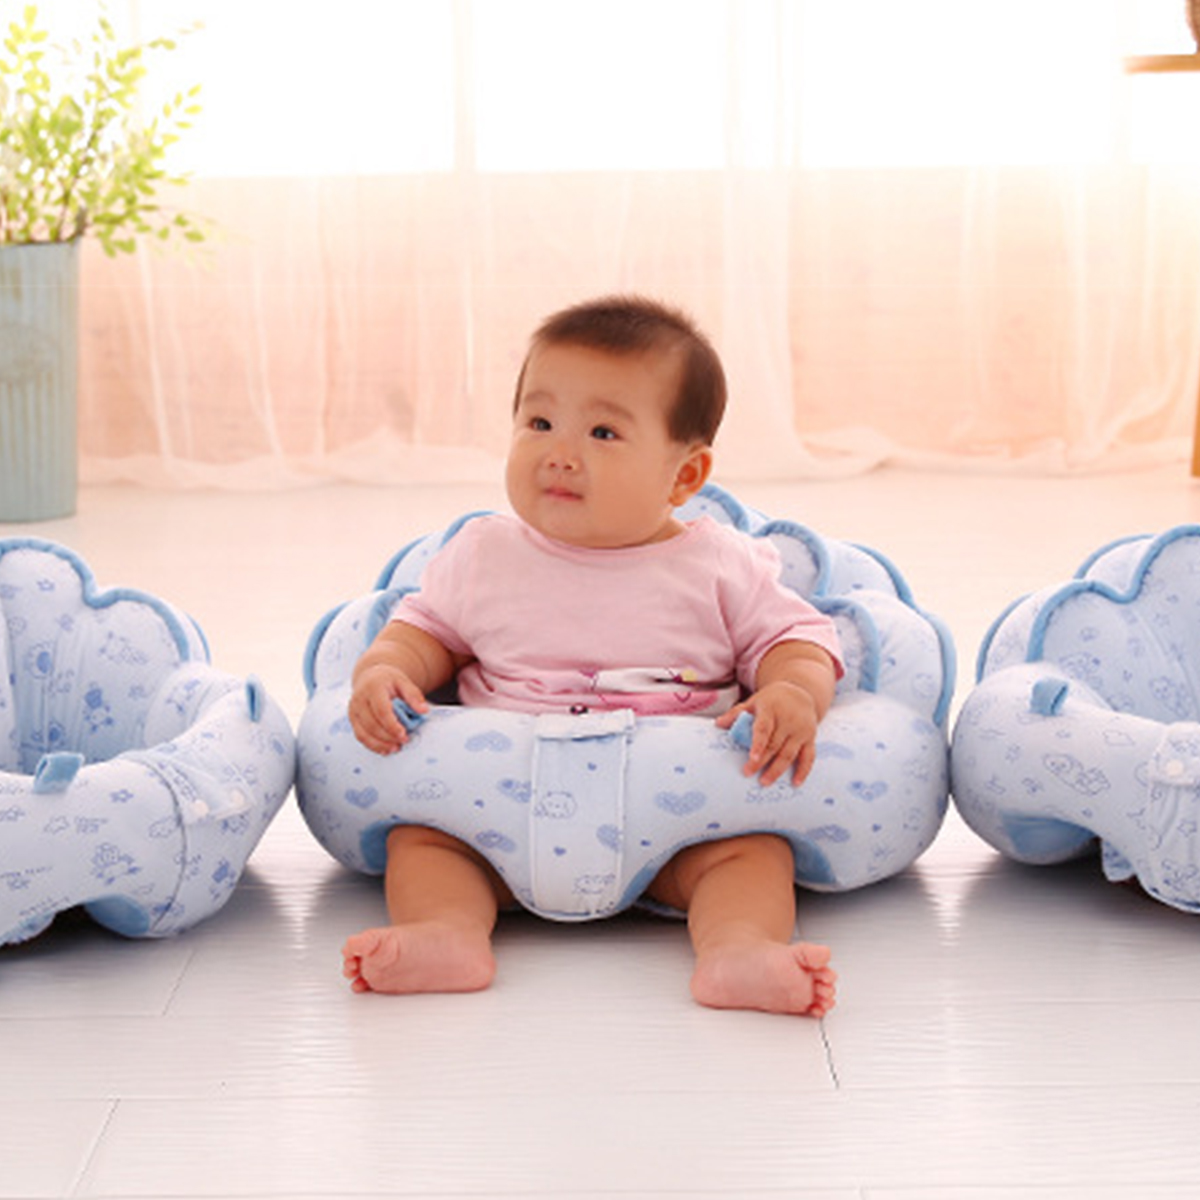 Blue-Pink-Color-Kids-Baby-360deg-Comfortable-Support-Seat-Plush-Sofa-Learning-To-Sit-Chair-Cushion-T-1887110-4